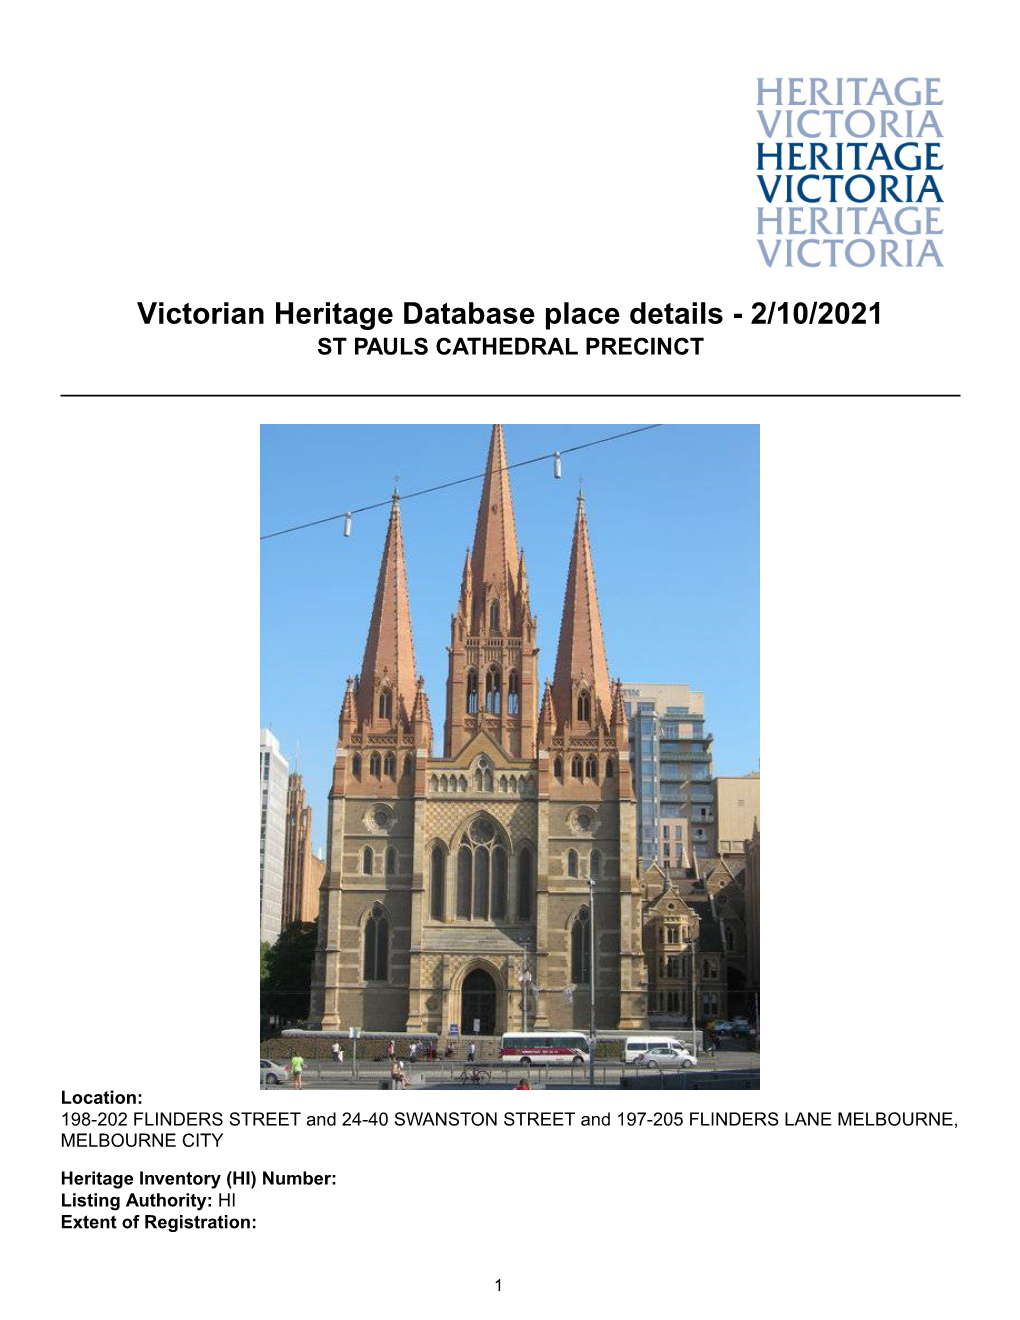 Victorian Heritage Database Place Details - 2/10/2021 ST PAULS CATHEDRAL PRECINCT